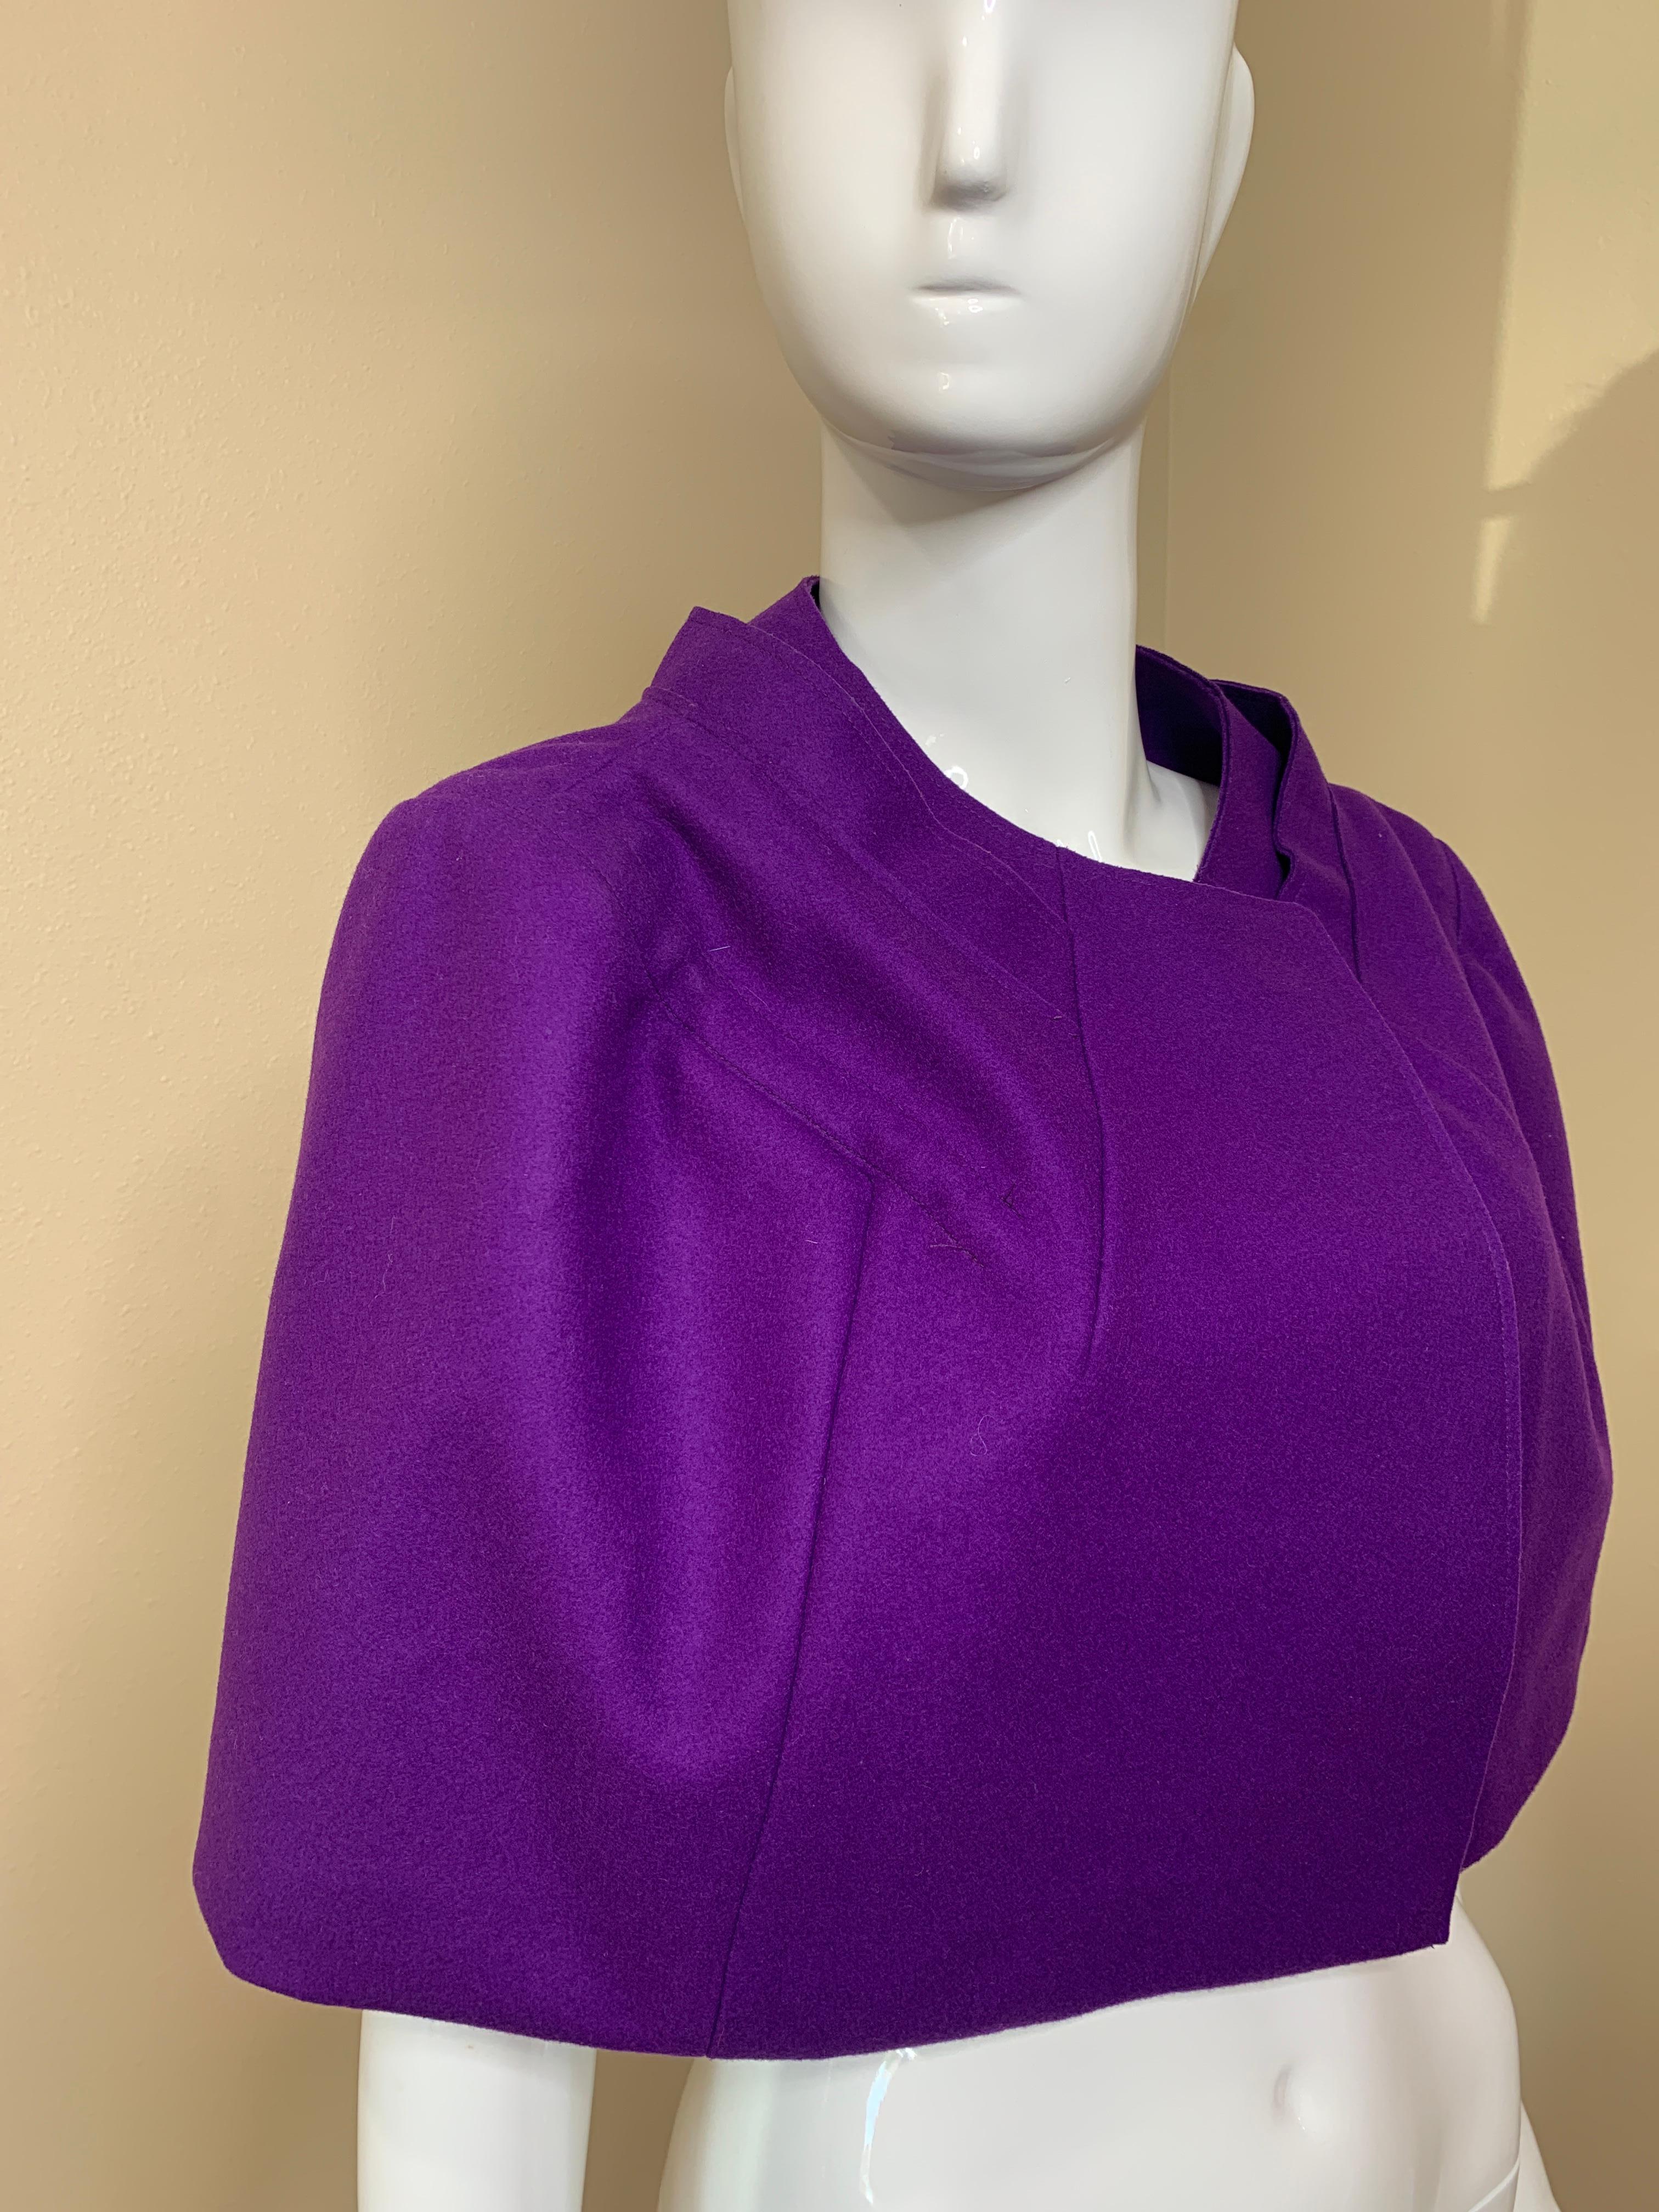 Marni Purple Cape Size 40 NWT  In Excellent Condition For Sale In Thousand Oaks, CA